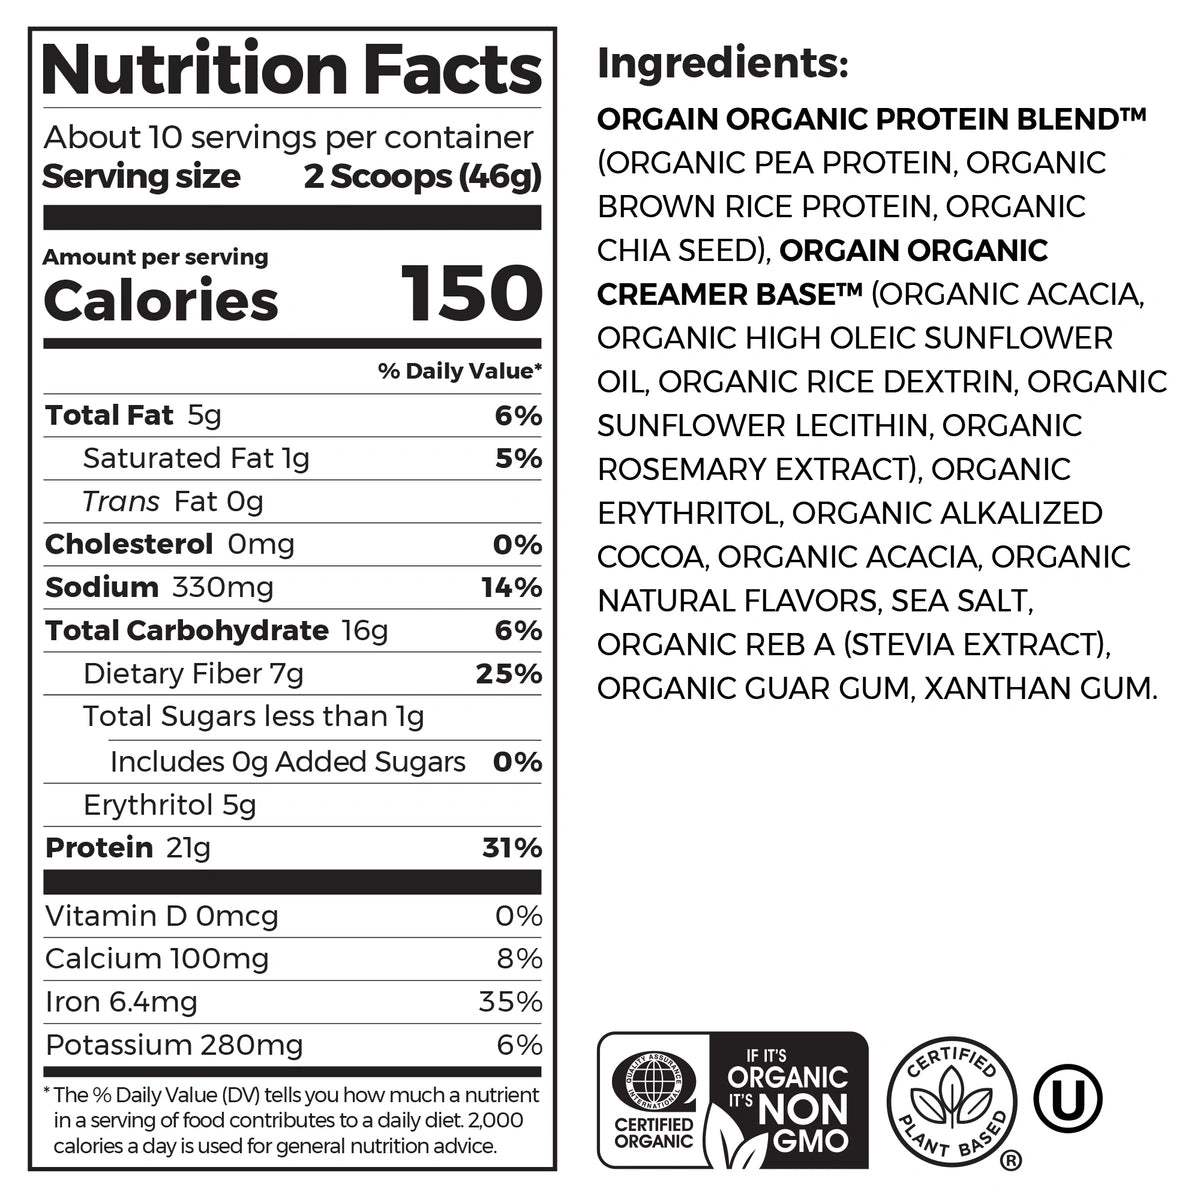 Nutrition Fact Panel and List of Ingredients for Organic Protein Plant Based Protein powder in creamy chocolate fudge flavor 1lb size